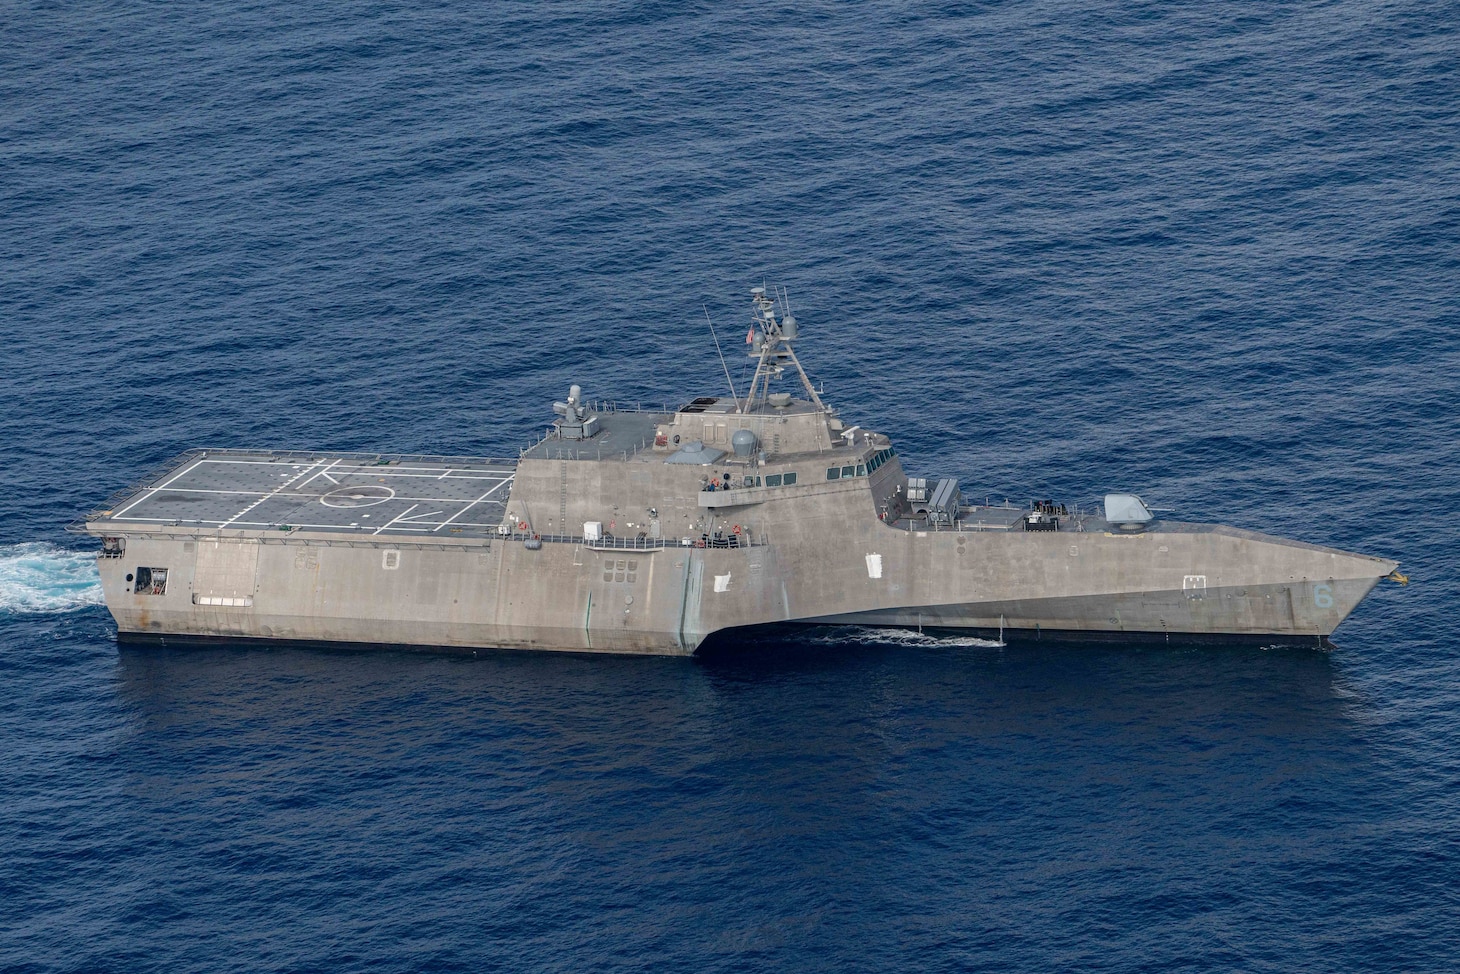 211101-N-FA490-1283 SOUTH CHINA SEA (Nov. 1, 2021) The Independence-variant littoral combat ship USS Jackson (LCS 6) transits the South China Sea during a search and rescue exercise (SAREX). Jackson, part of Destroyer Squadron Seven, is on a rotational deployment in the U.S. 7th Fleet area of operation to enhance interoperability with partners and serve as a ready-response force in support of a free and open Indo-Pacific region. (U.S. Navy photo by Mass Communication Specialist 3rd Class Andrew Langholf)